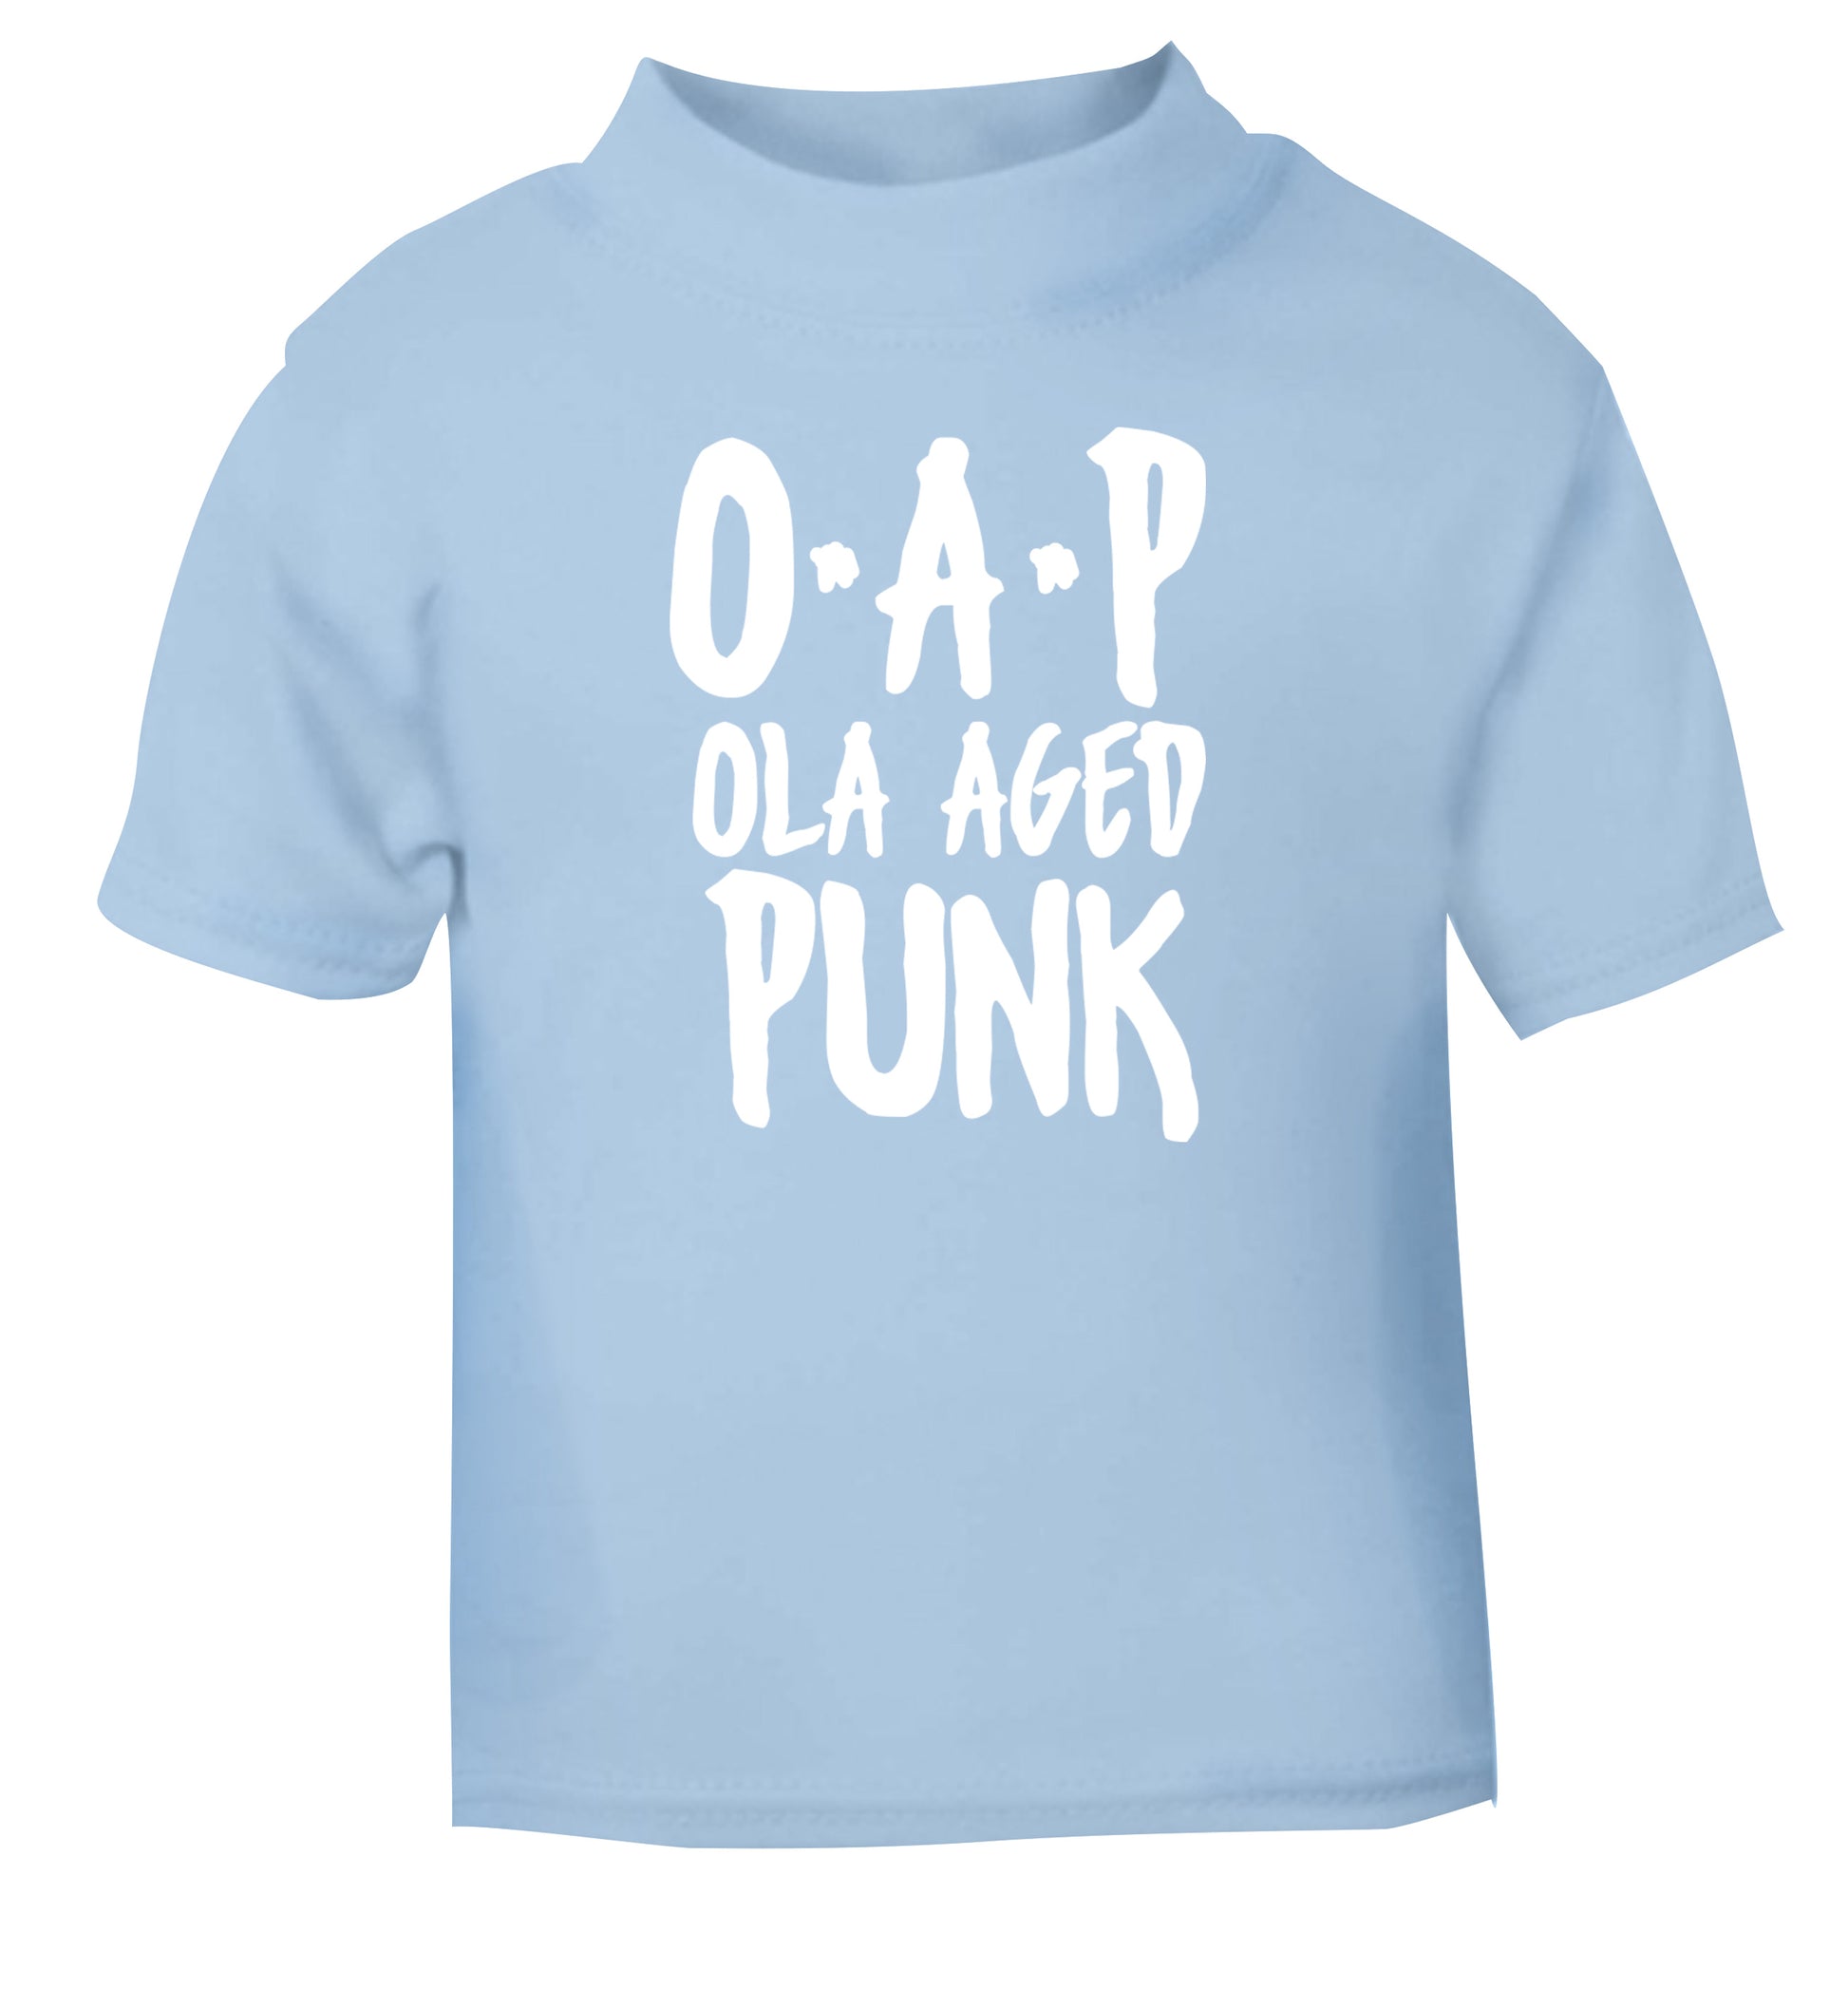 O.A.P Old Aged Punk light blue Baby Toddler Tshirt 2 Years